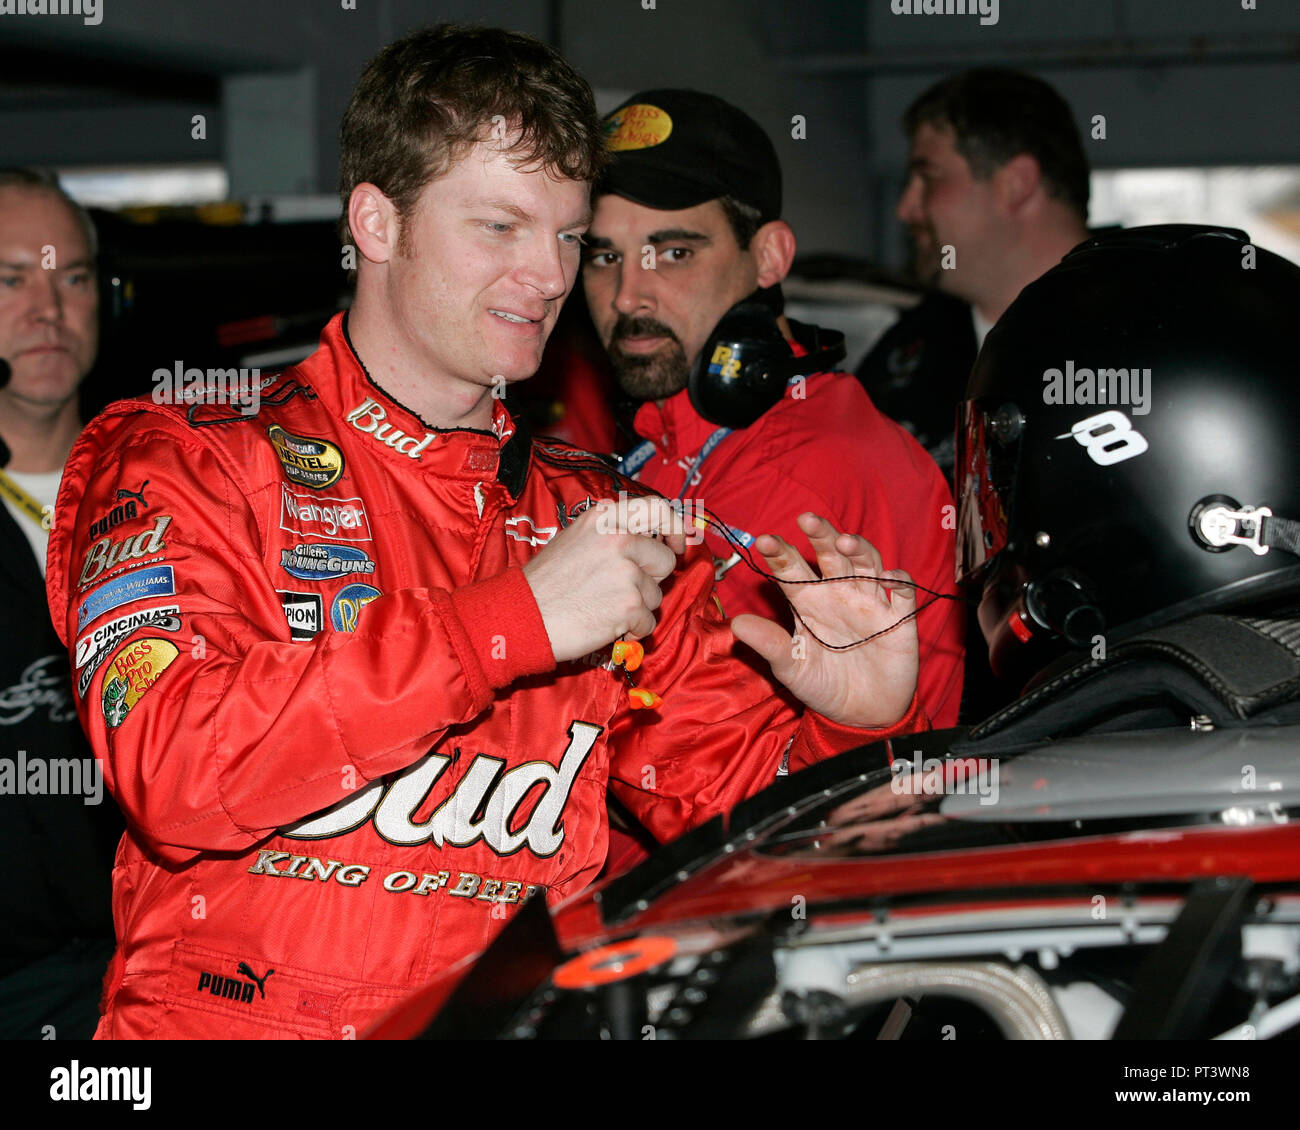 Dale Earnhardt Jr participates in a NASCAR Nextel Cup test session at Homestead Miami Speedway in Homestead, Florida on October 17, 2006. Stock Photo